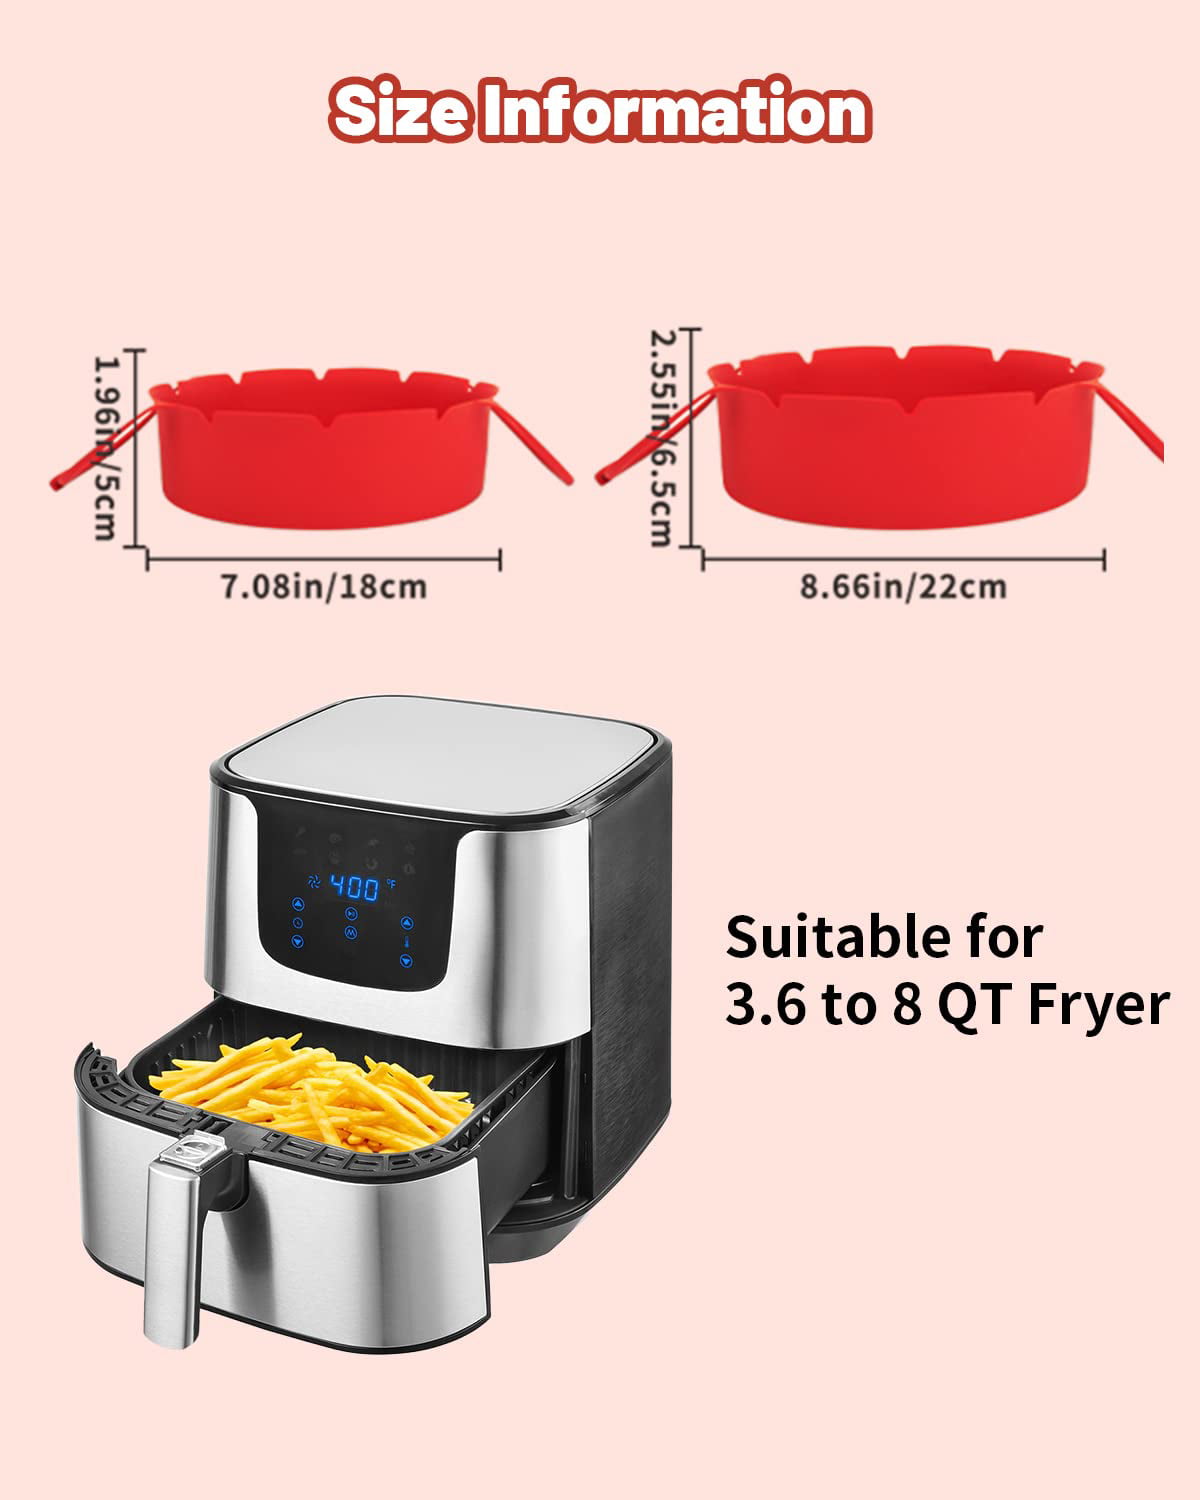 Silicone Air Fryer Liners 2 Pack, Altalsby 8 inch Non-Stick Reusable Air  Fryer Basket Liners for 3-5 QT Baskets, Round Heat Resistant Easy Cleaning